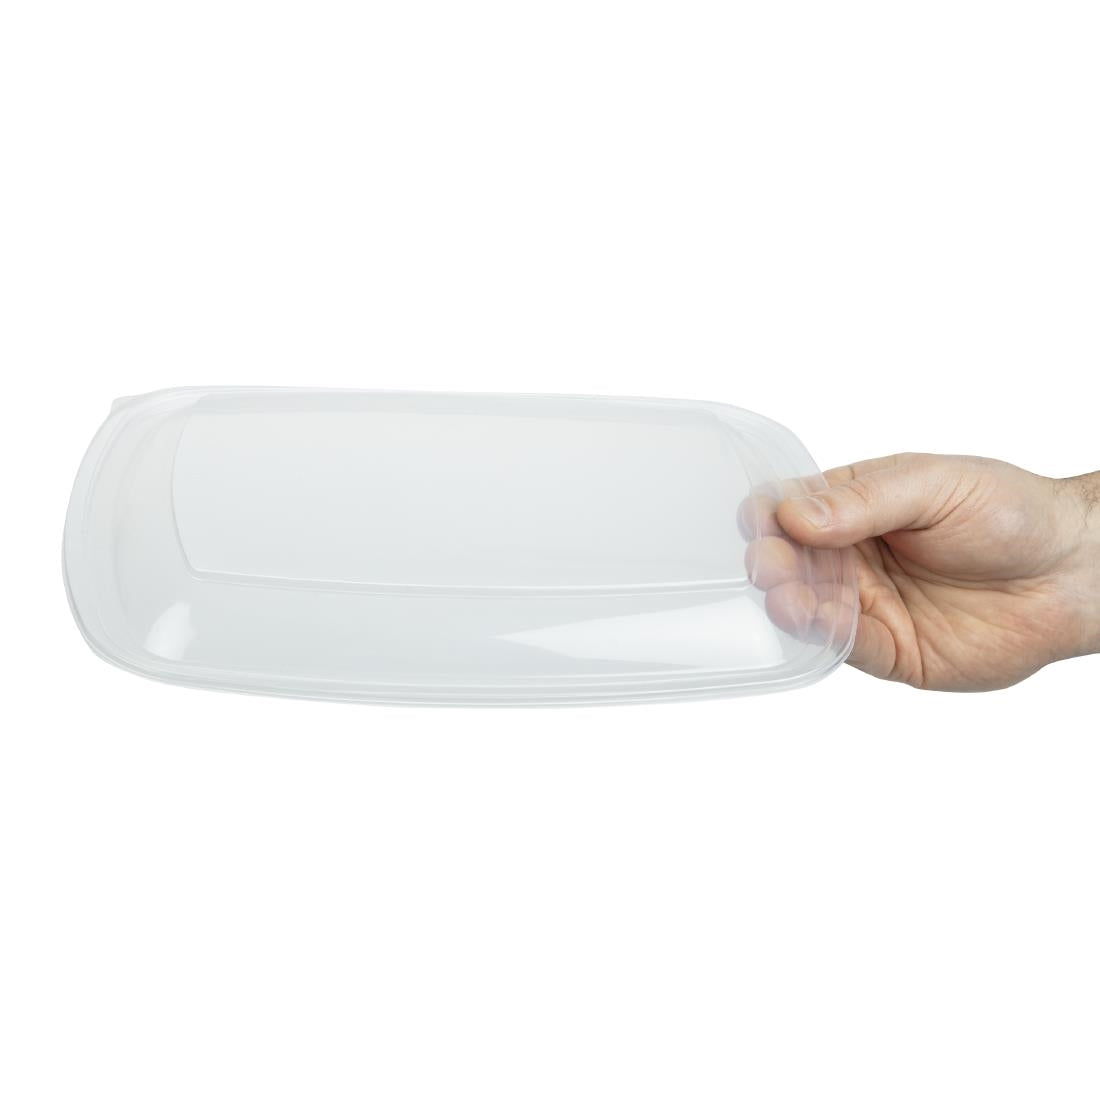 Fastpac Large Rectangular Food Container Lids 1350ml / 48oz (Pack of 150) JD Catering Equipment Solutions Ltd